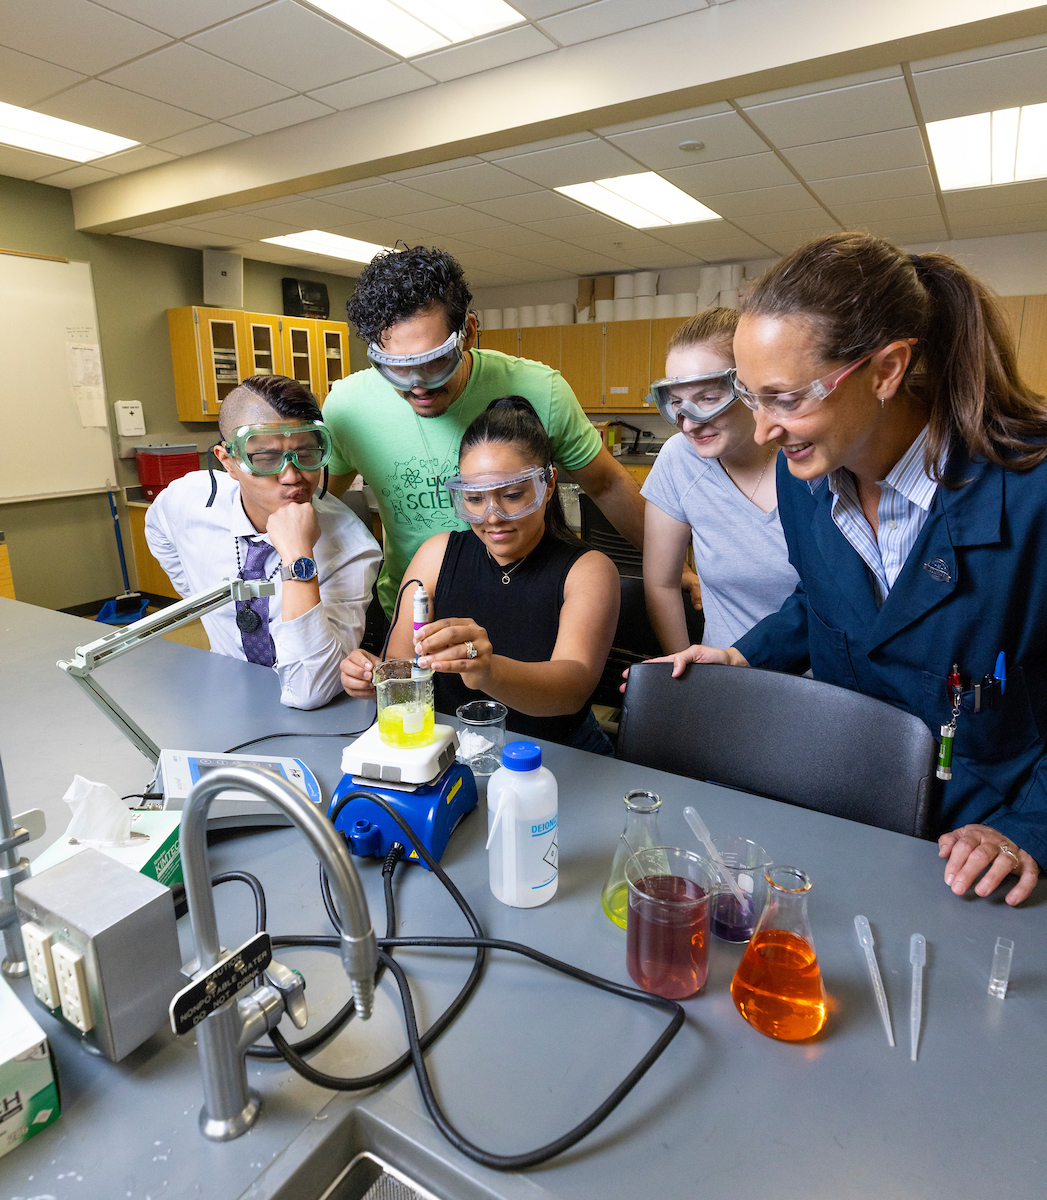 Image of a professor and their students in a science lab